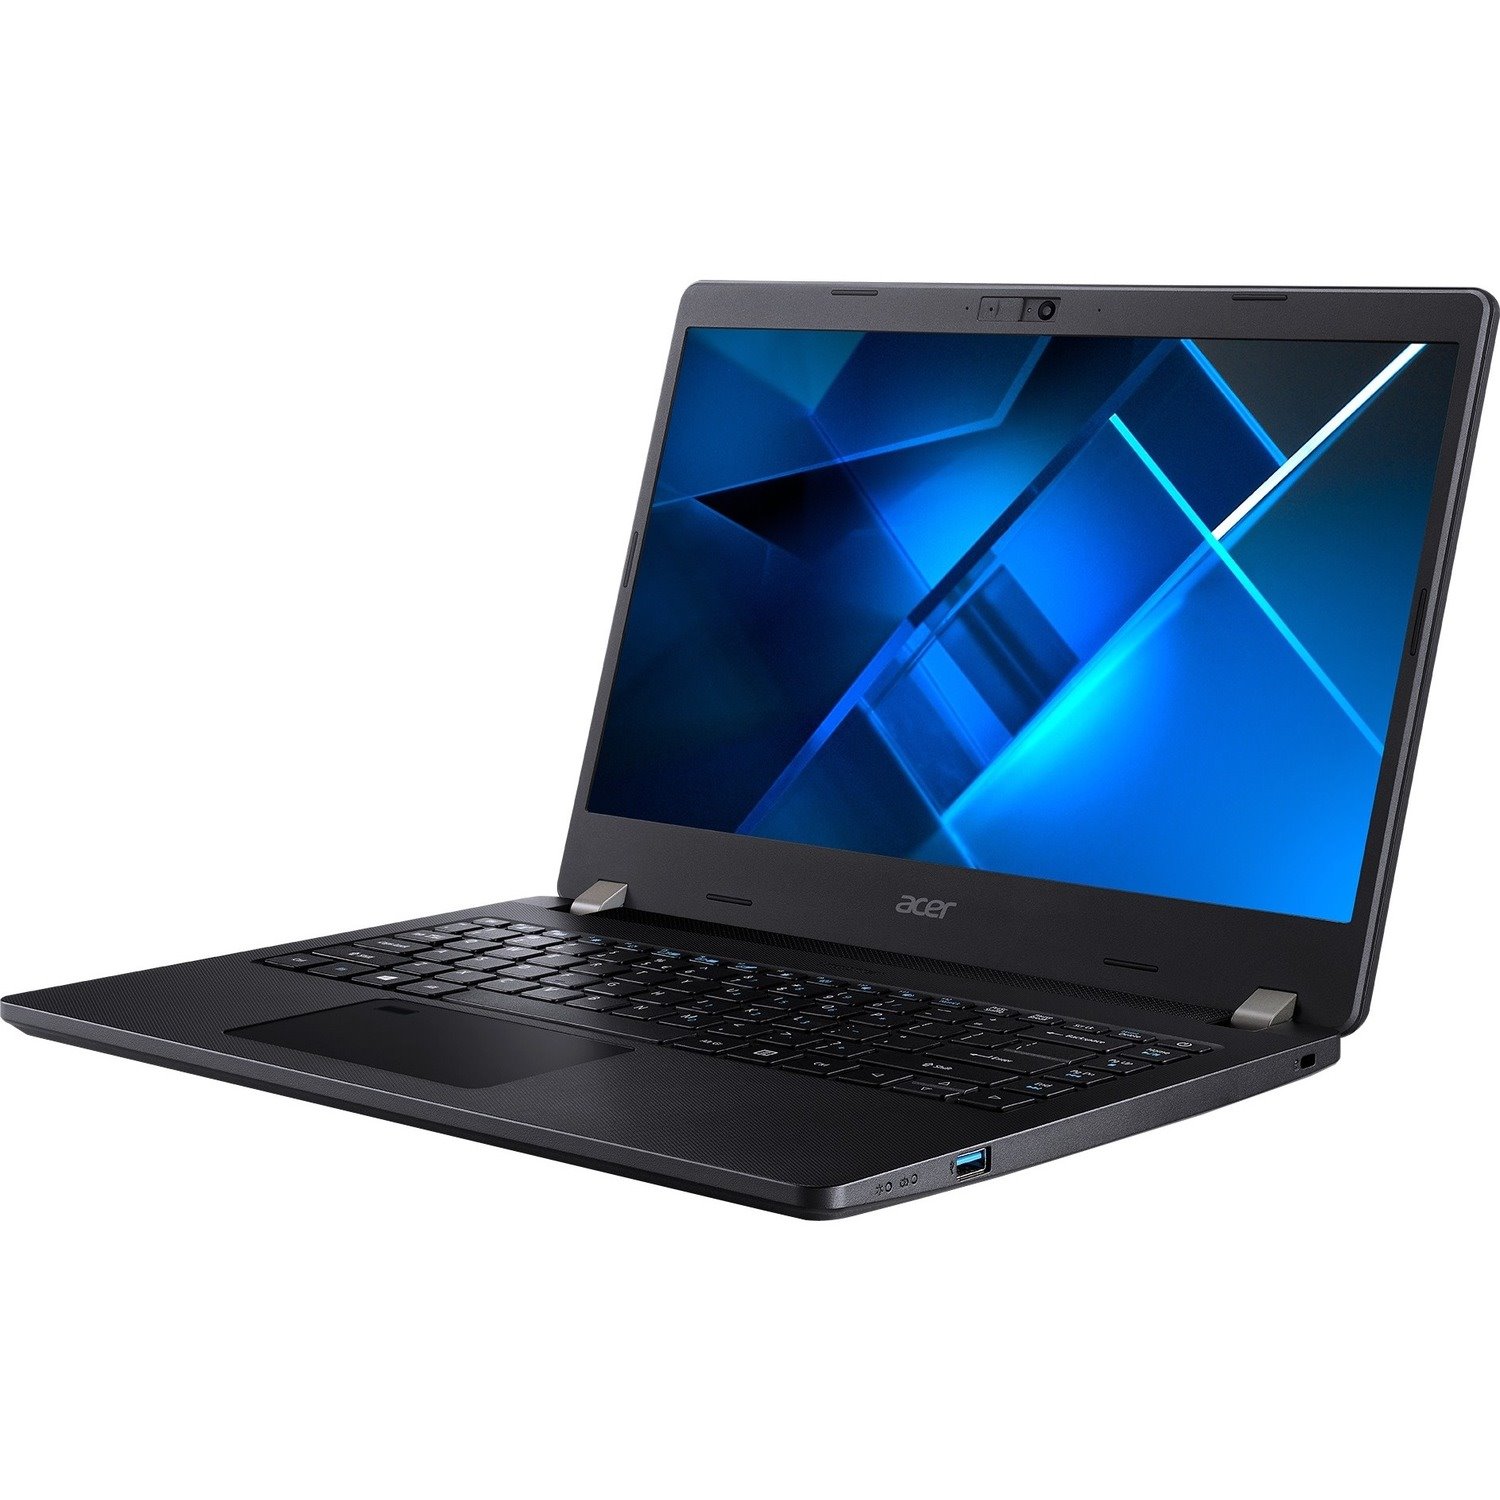 Acer TravelMate P2 P214-53 TMP214-53-78NG 14" Notebook - Full HD - 1920 x 1080 - Intel Core i7 11th Gen i7-1165G7 Quad-core (4 Core) 2.80 GHz - 16 GB Total RAM - 512 GB SSD